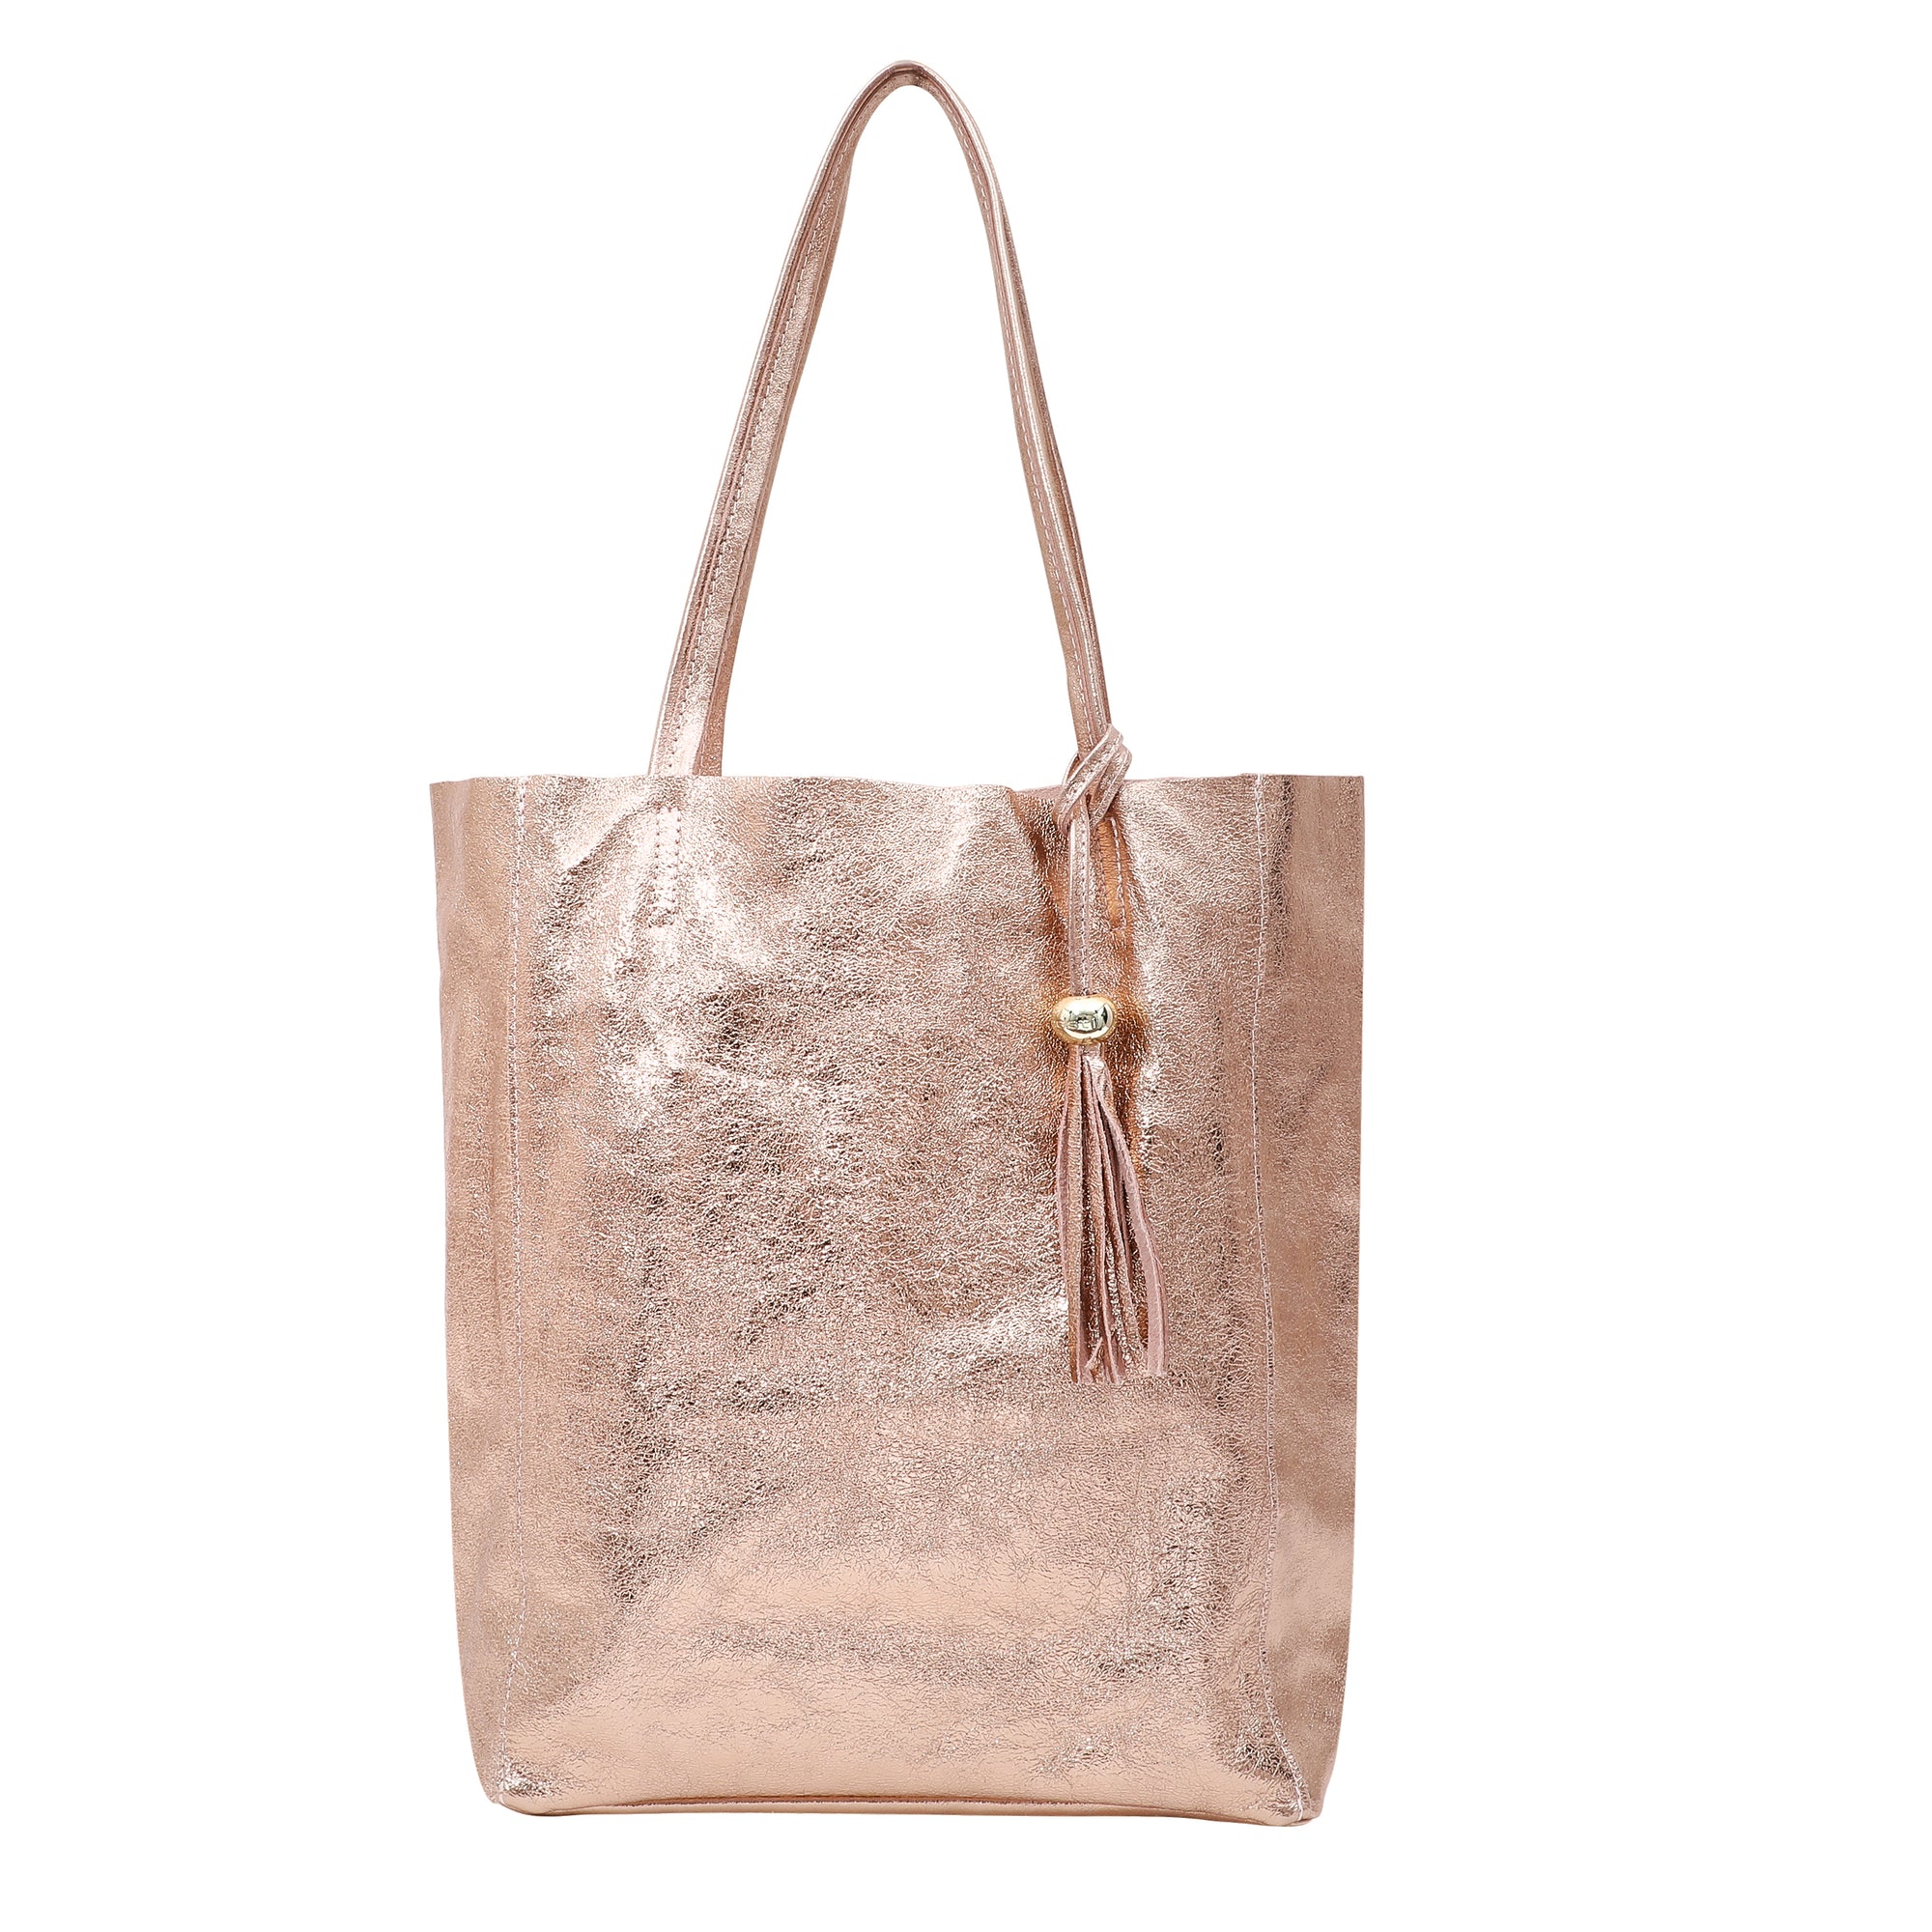 The 'Bessie' Italian Leather Shopper in Light Gold